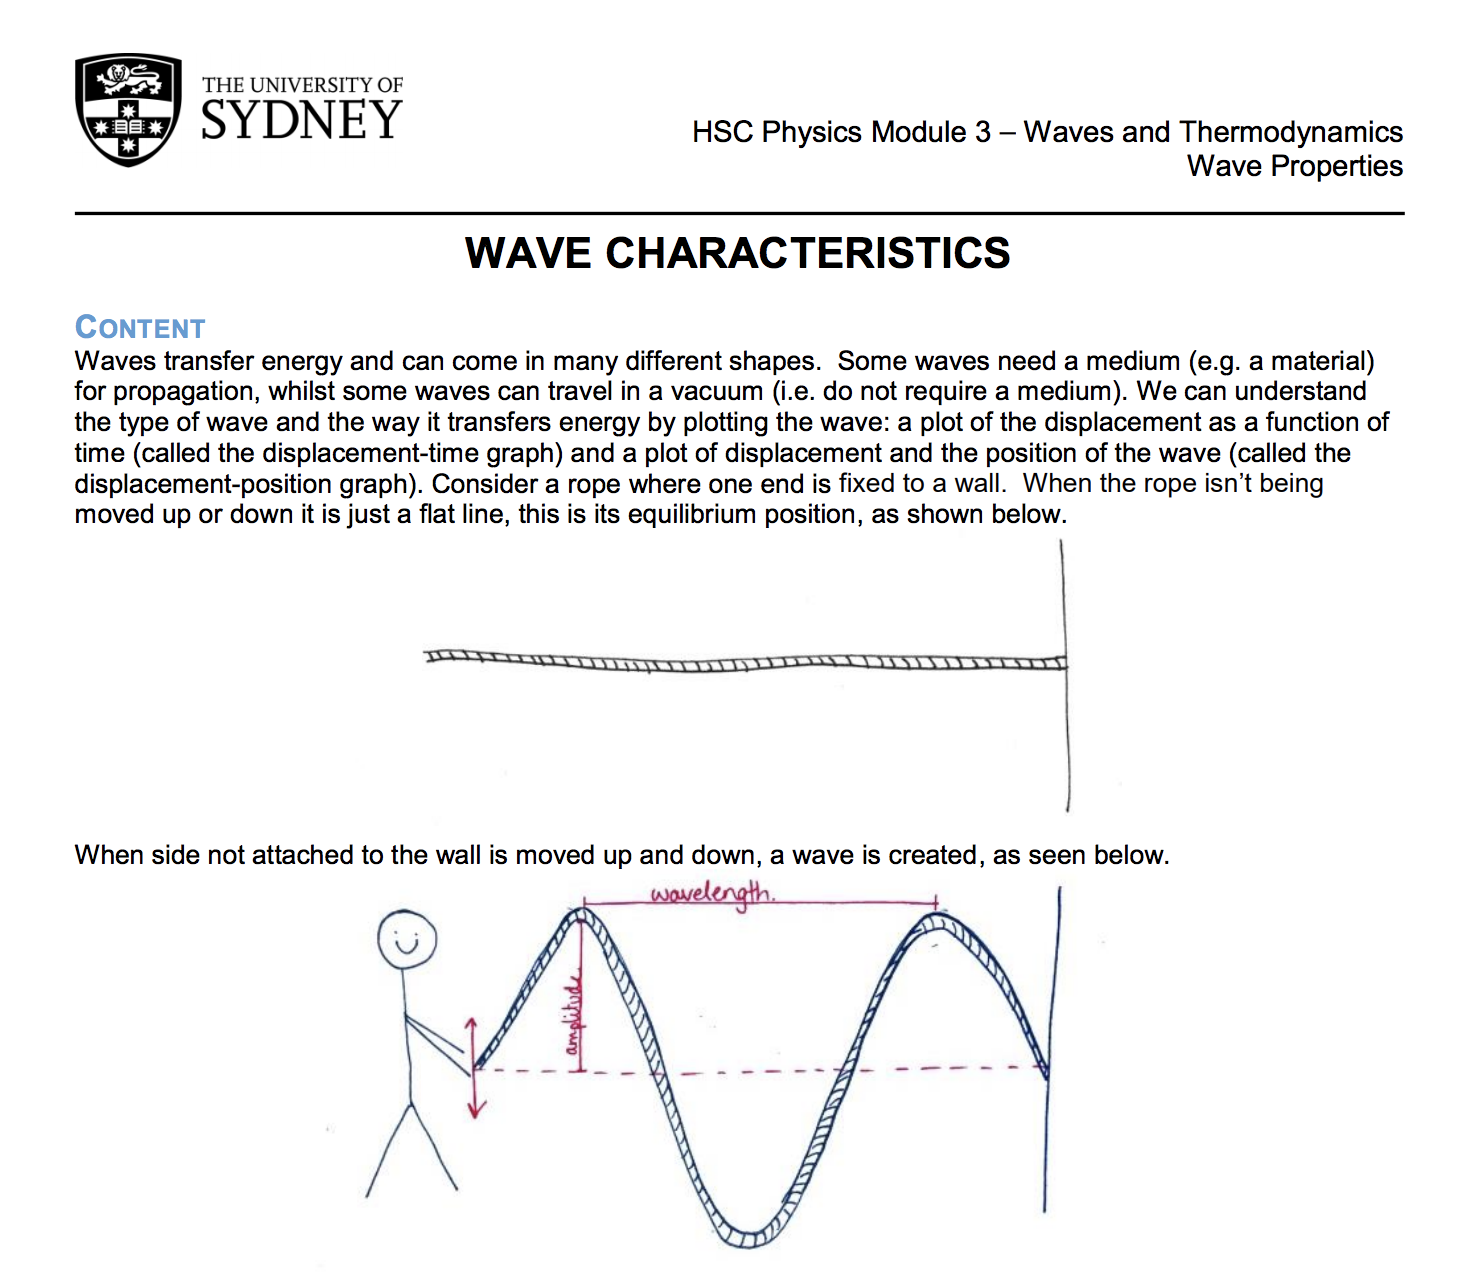 HSC Physics Year 11 Module 3 Waves and Thermodynamics